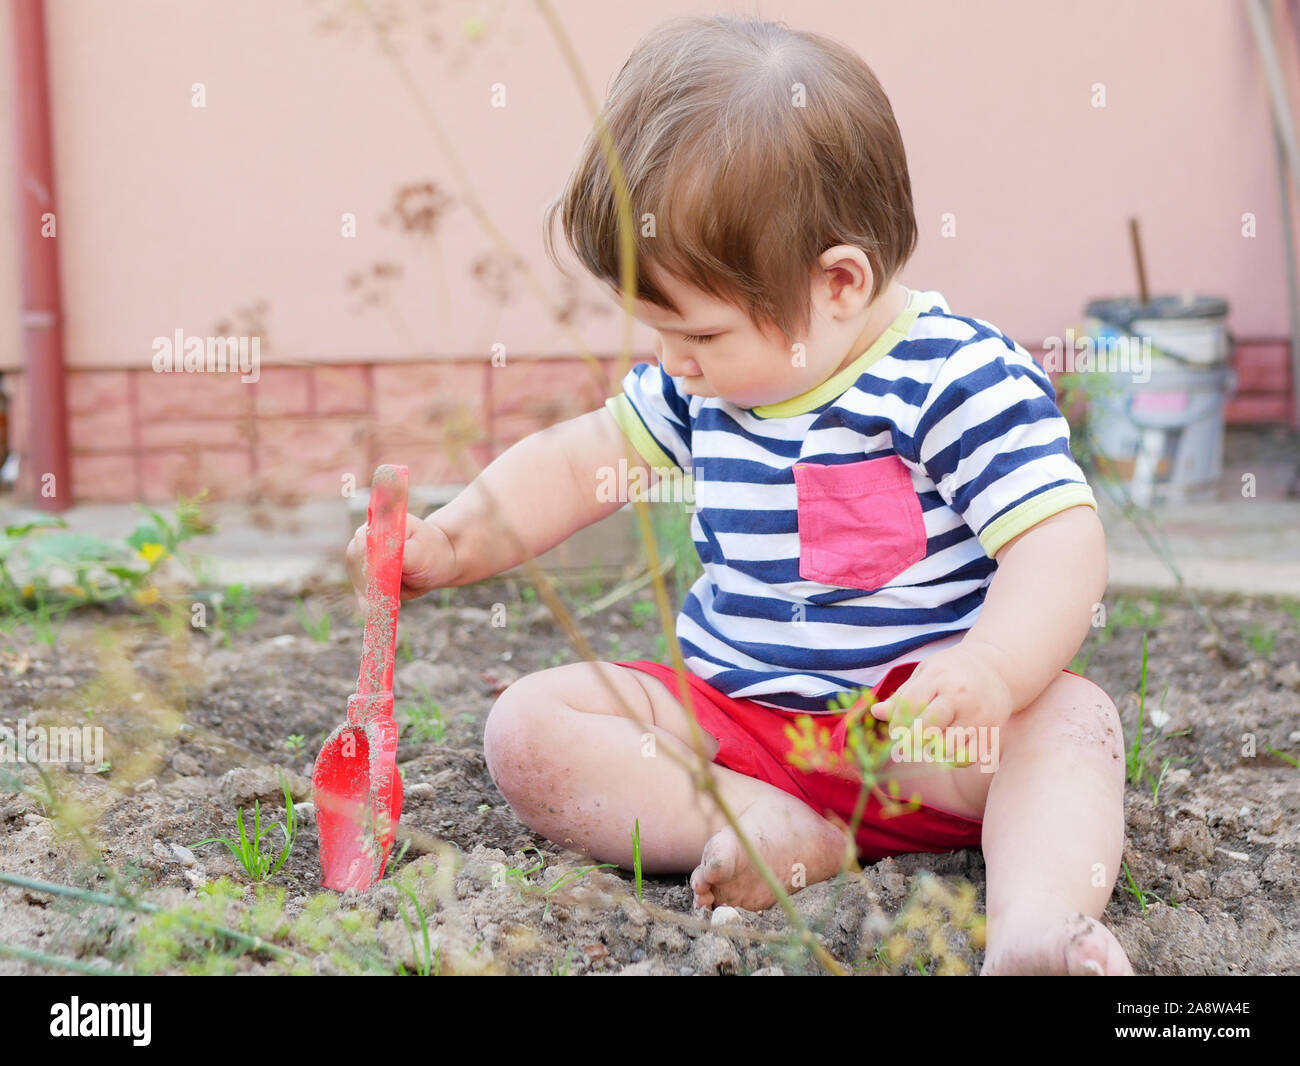 A boy plays with a spatula on the street. Baby boy and red shovel. Boy 0-1 years old Stock Photo